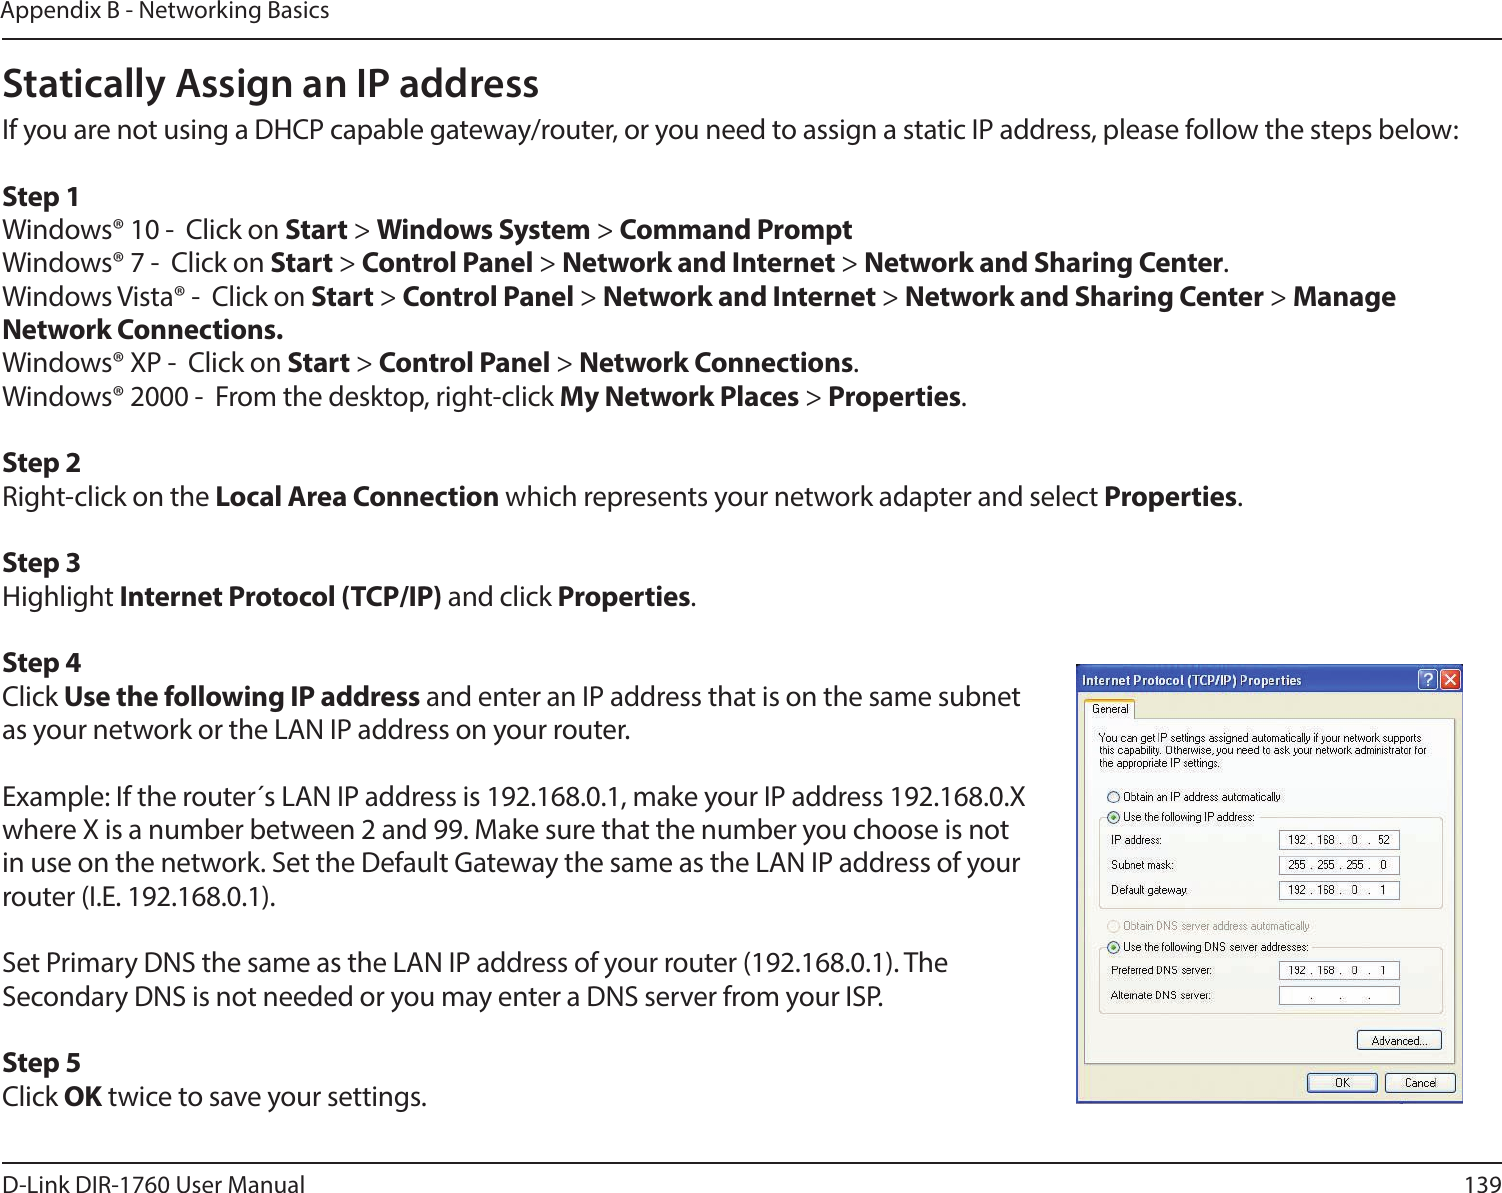 139D-Link DIR-1760 User ManualAppendix B - Networking BasicsStatically Assign an IP addressIf you are not using a DHCP capable gateway/router, or you need to assign a static IP address, please follow the steps below:Step 1Windows® 10 -  Click on Start &gt; Windows System &gt; Command PromptWindows® 7 -  Click on Start &gt; Control Panel &gt; Network and Internet &gt; Network and Sharing Center.Windows Vista® -  Click on Start &gt; Control Panel &gt; Network and Internet &gt; Network and Sharing Center &gt; Manage      Network Connections.Windows® XP -  Click on Start &gt; Control Panel &gt; Network Connections.Windows® 2000 -  From the desktop, right-click My Network Places &gt; Properties.Step 2Right-click on the Local Area Connection which represents your network adapter and select Properties.Step 3Highlight Internet Protocol (TCP/IP) and click Properties.Step 4Click Use the following IP address and enter an IP address that is on the same subnet as your network or the LAN IP address on your router. Example: If the router´s LAN IP address is 192.168.0.1, make your IP address 192.168.0.X where X is a number between 2 and 99. Make sure that the number you choose is not in use on the network. Set the Default Gateway the same as the LAN IP address of your router (I.E. 192.168.0.1). Set Primary DNS the same as the LAN IP address of your router (192.168.0.1). The Secondary DNS is not needed or you may enter a DNS server from your ISP.Step 5Click OK twice to save your settings.